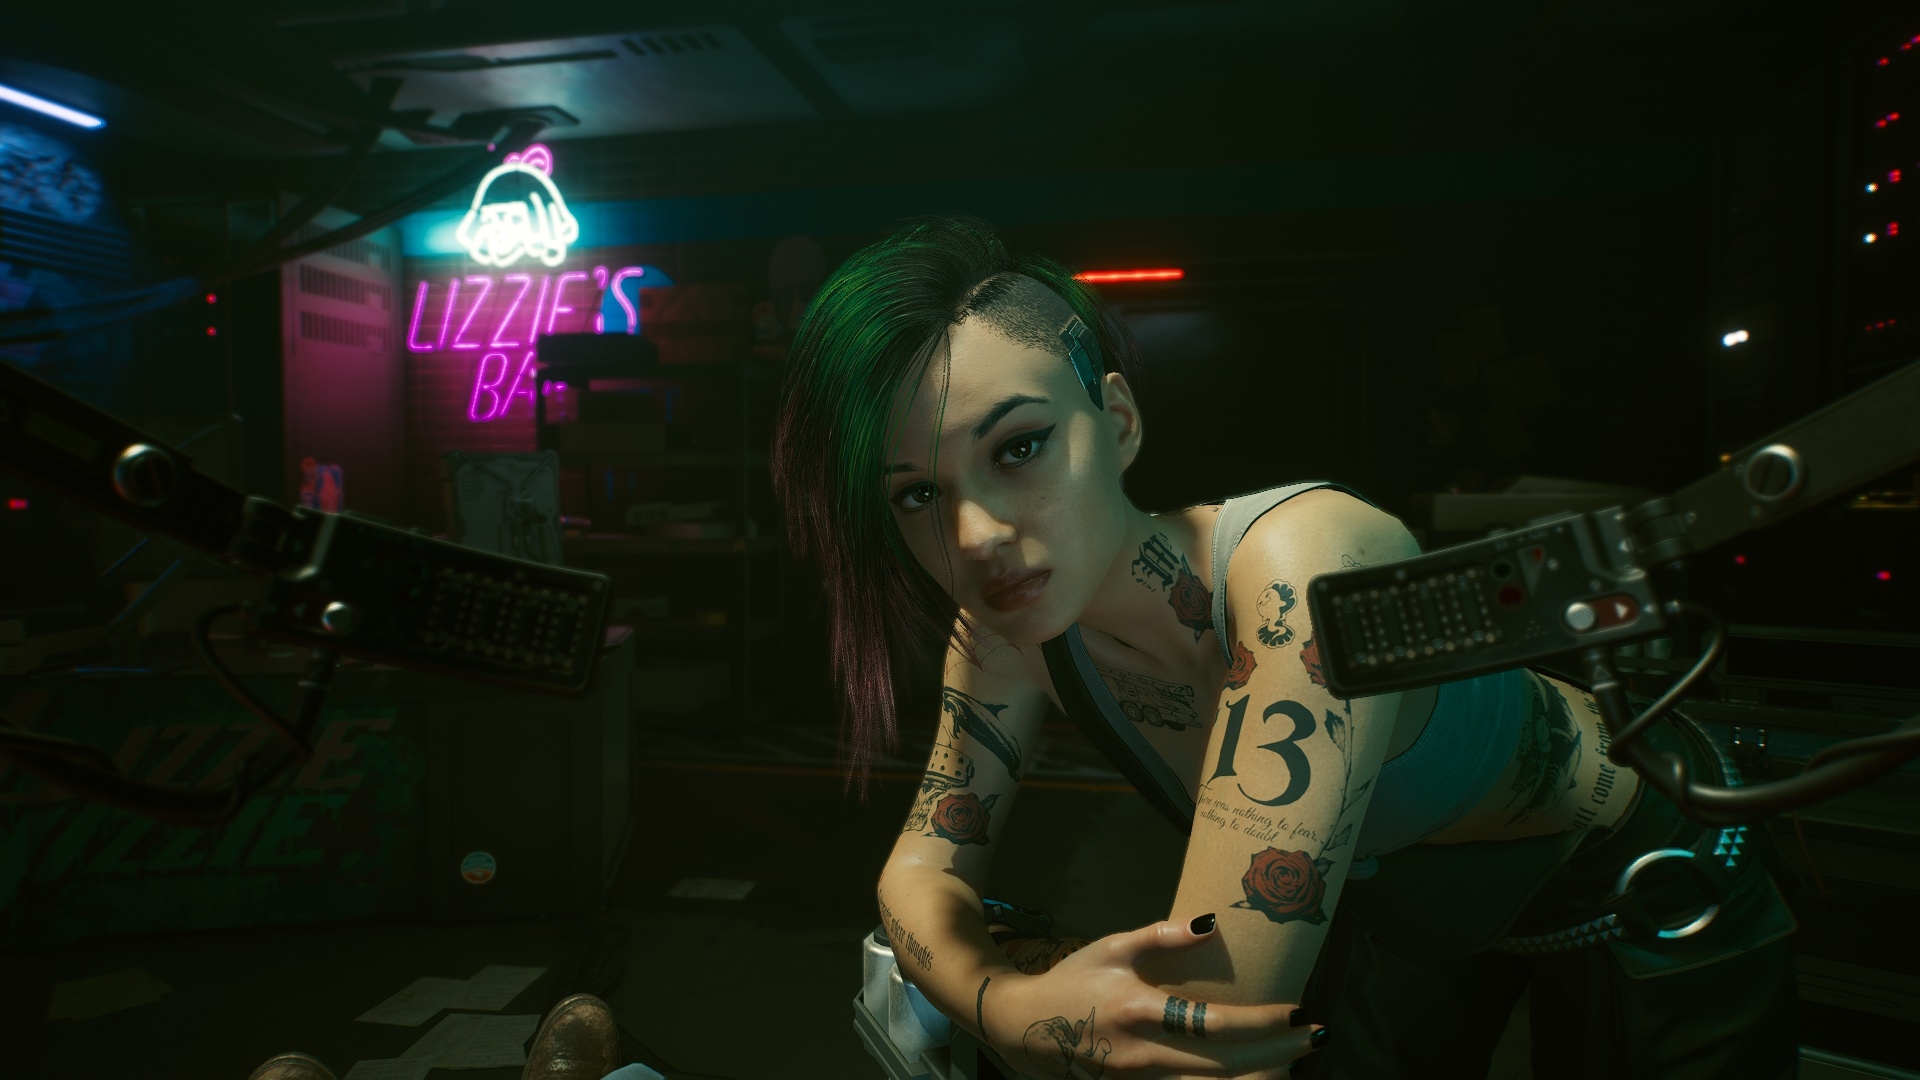 HD Cyberpunk 2077 Wallpaper, HD Games 4K Wallpapers, Images and